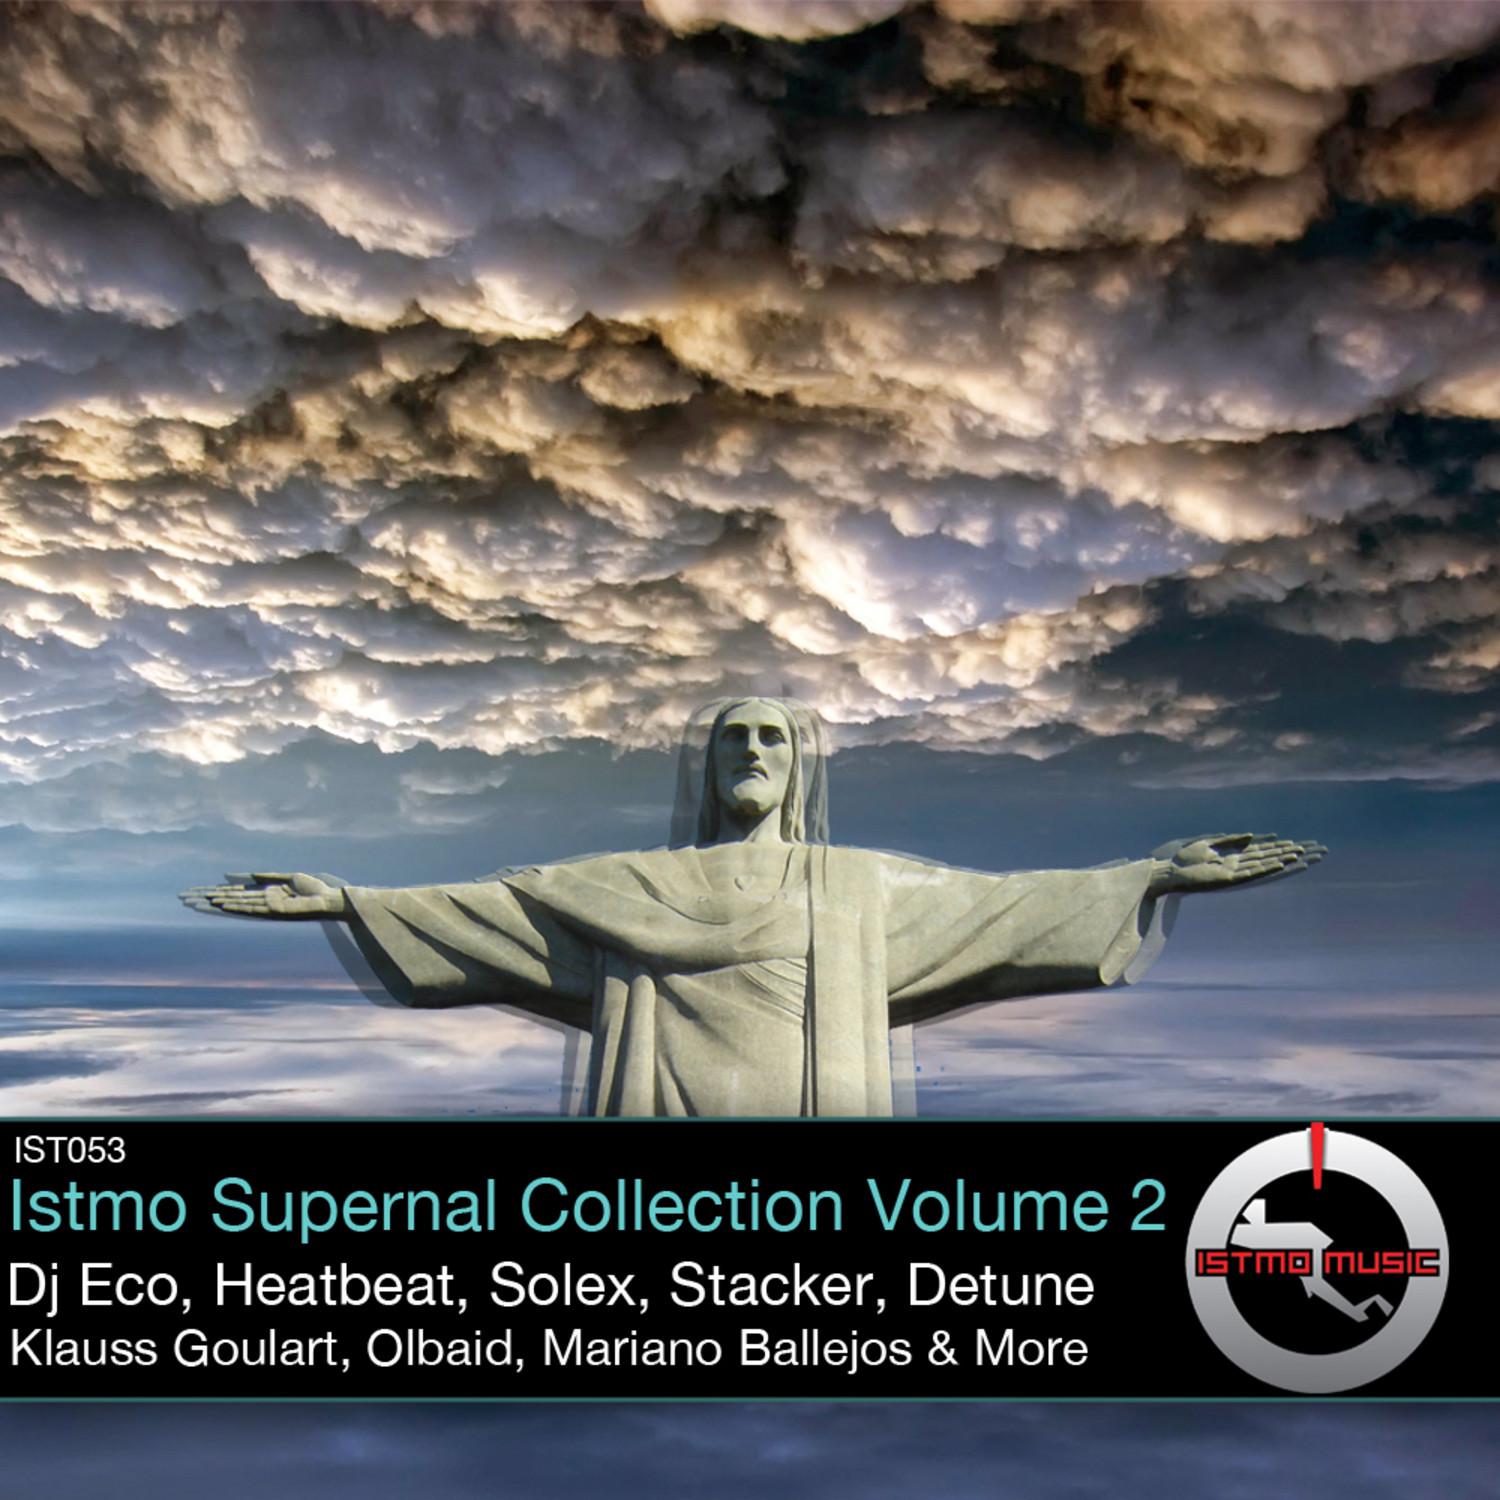 Istmo Supernal Collection Vol. 2 Unmixed